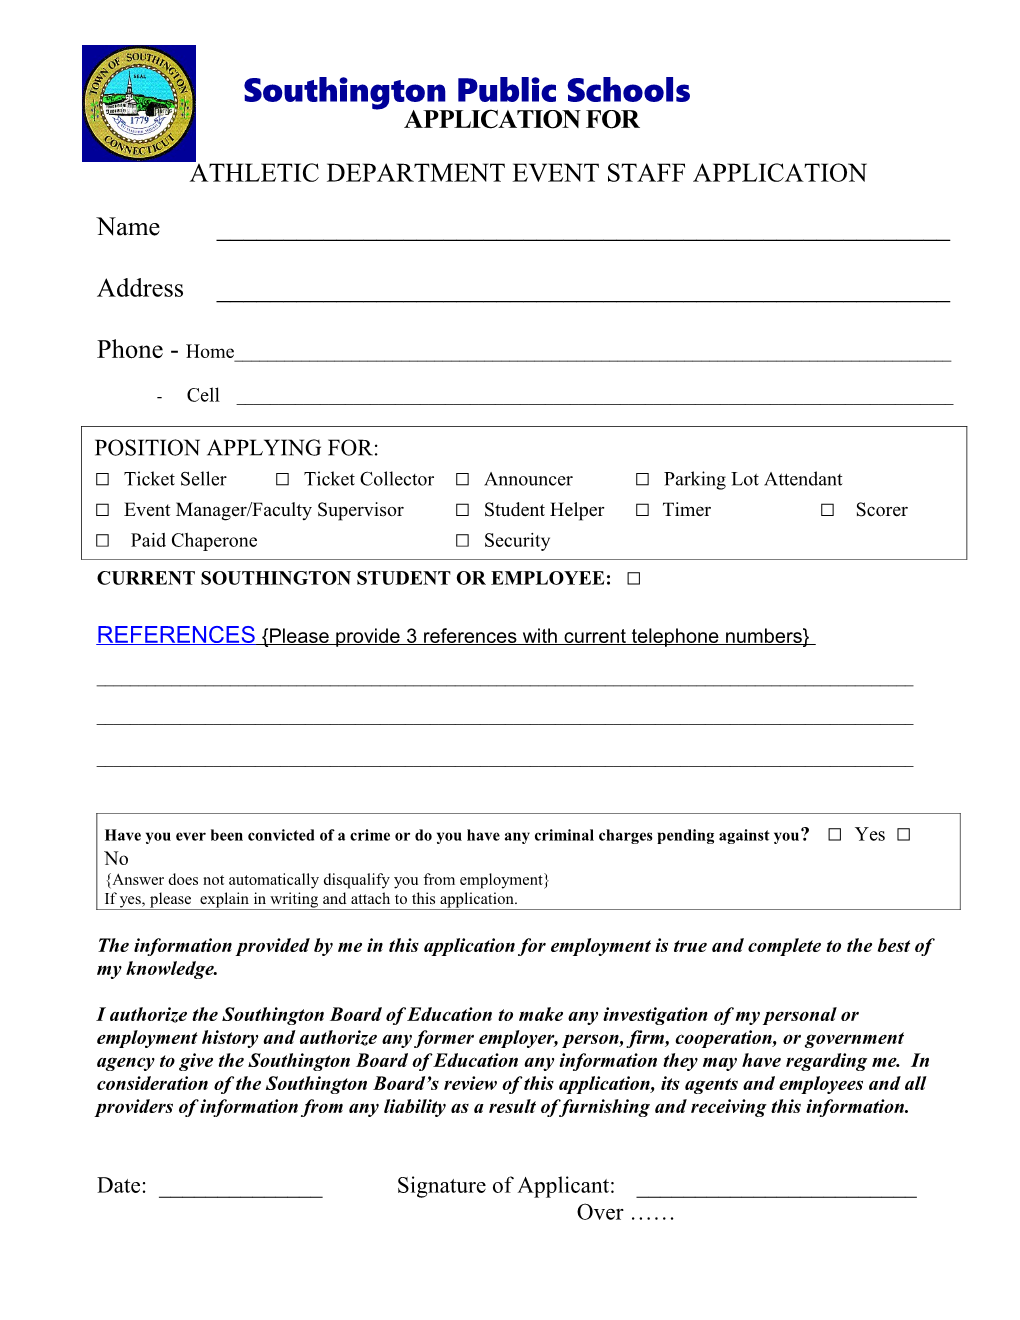 Athletic Department Event Staff Application